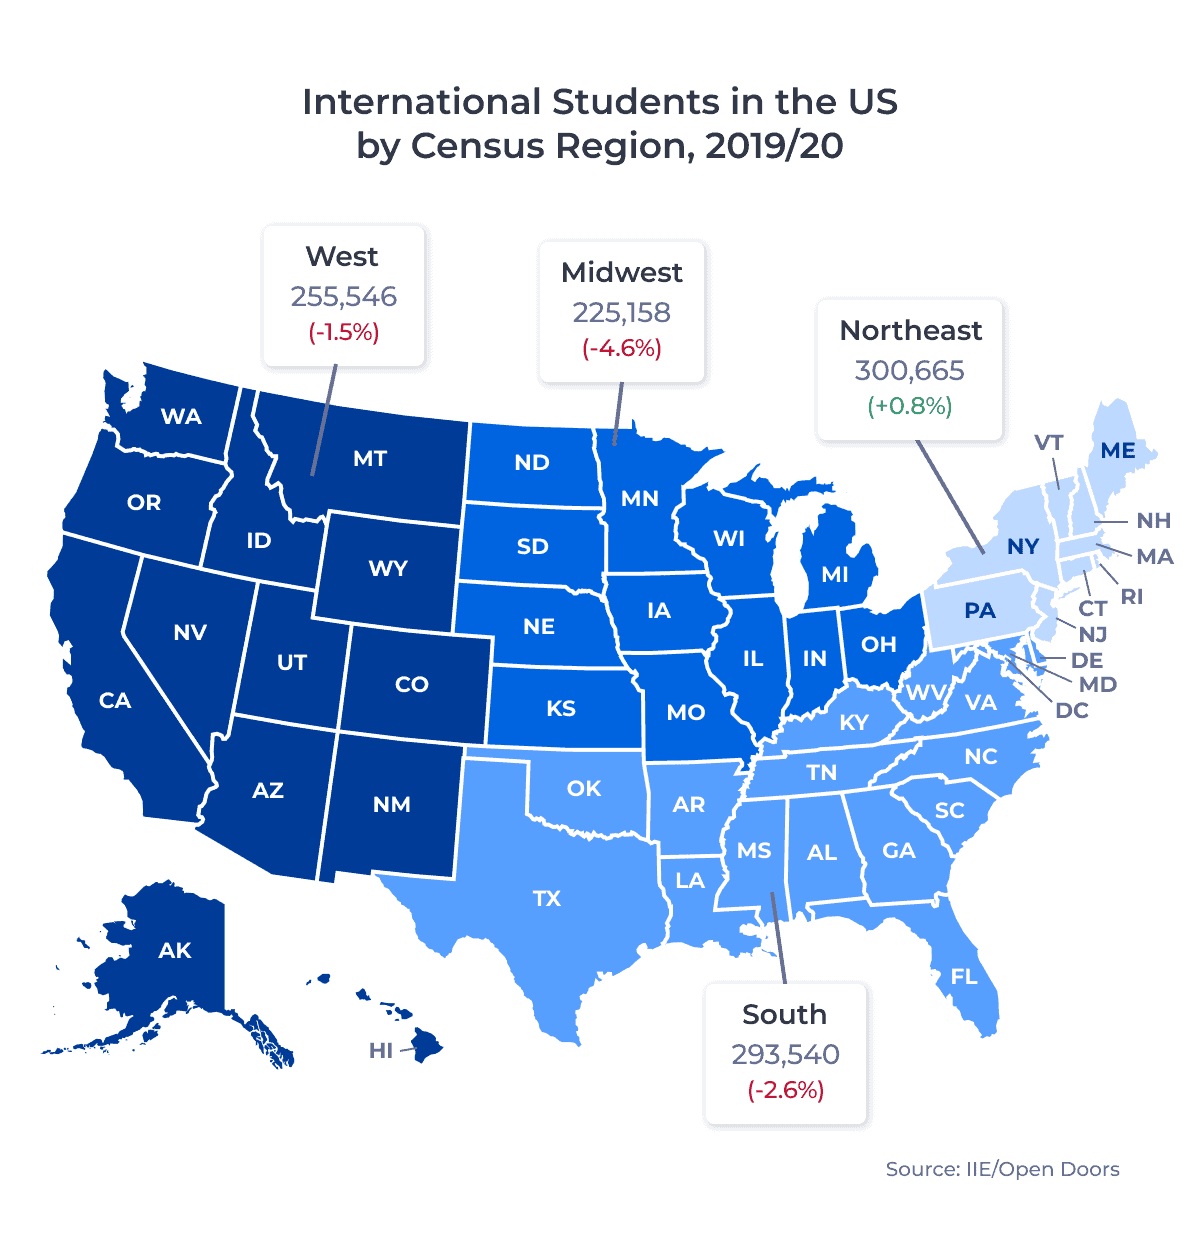 Map of the US showing the distribution of international students in the country by census region in the 2019/20 academic year. Examined in detail below.